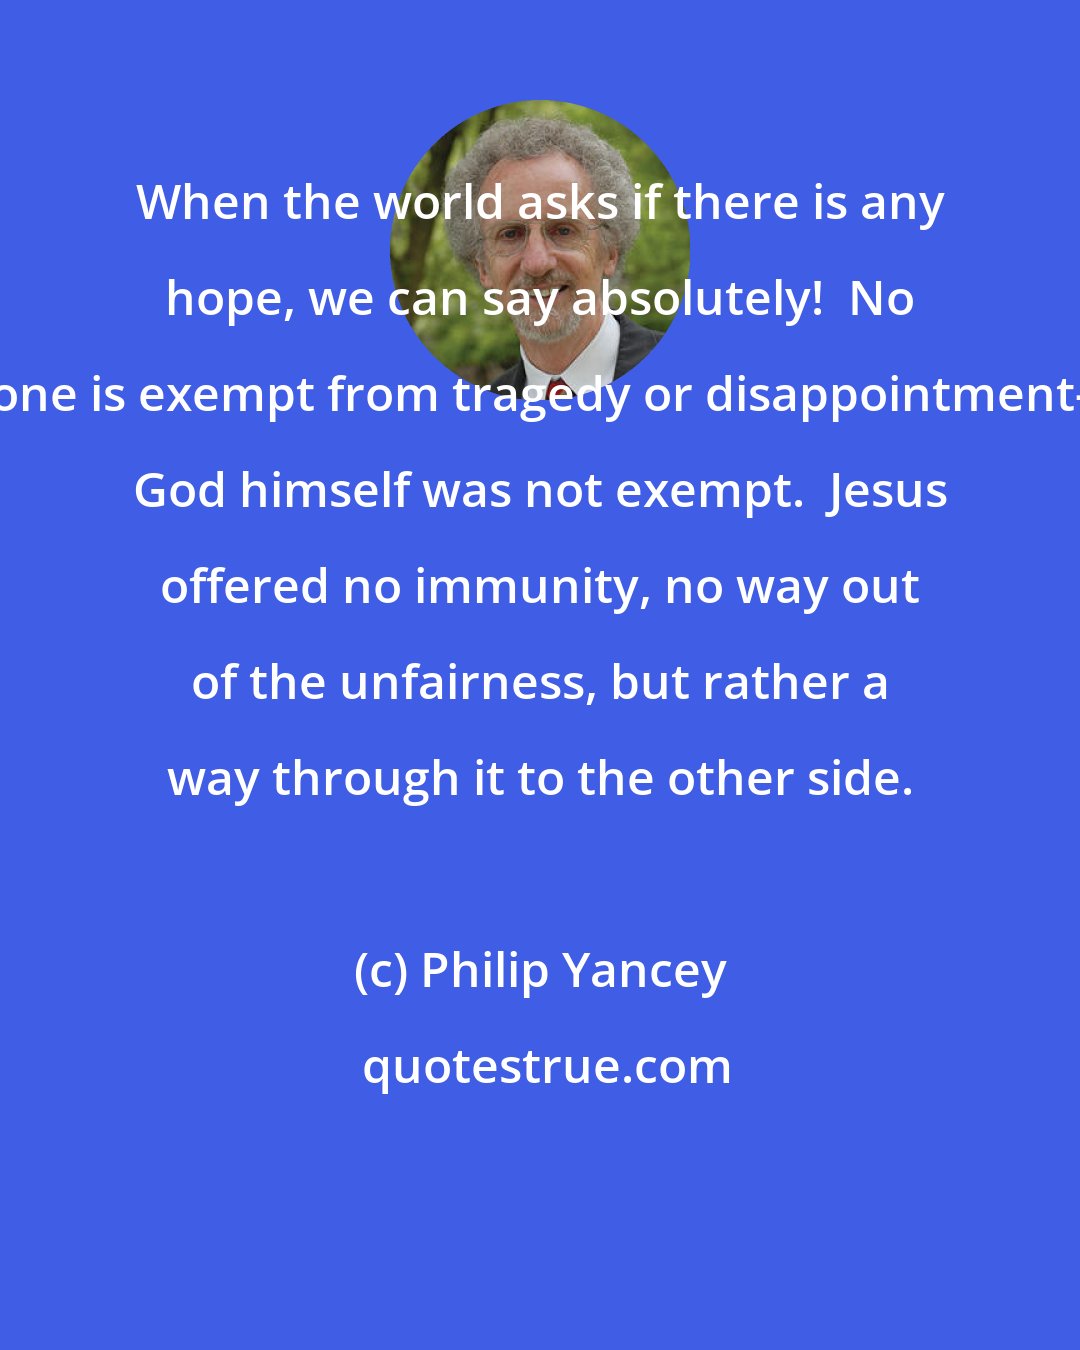 Philip Yancey: When the world asks if there is any hope, we can say absolutely!  No one is exempt from tragedy or disappointment- God himself was not exempt.  Jesus offered no immunity, no way out of the unfairness, but rather a way through it to the other side.